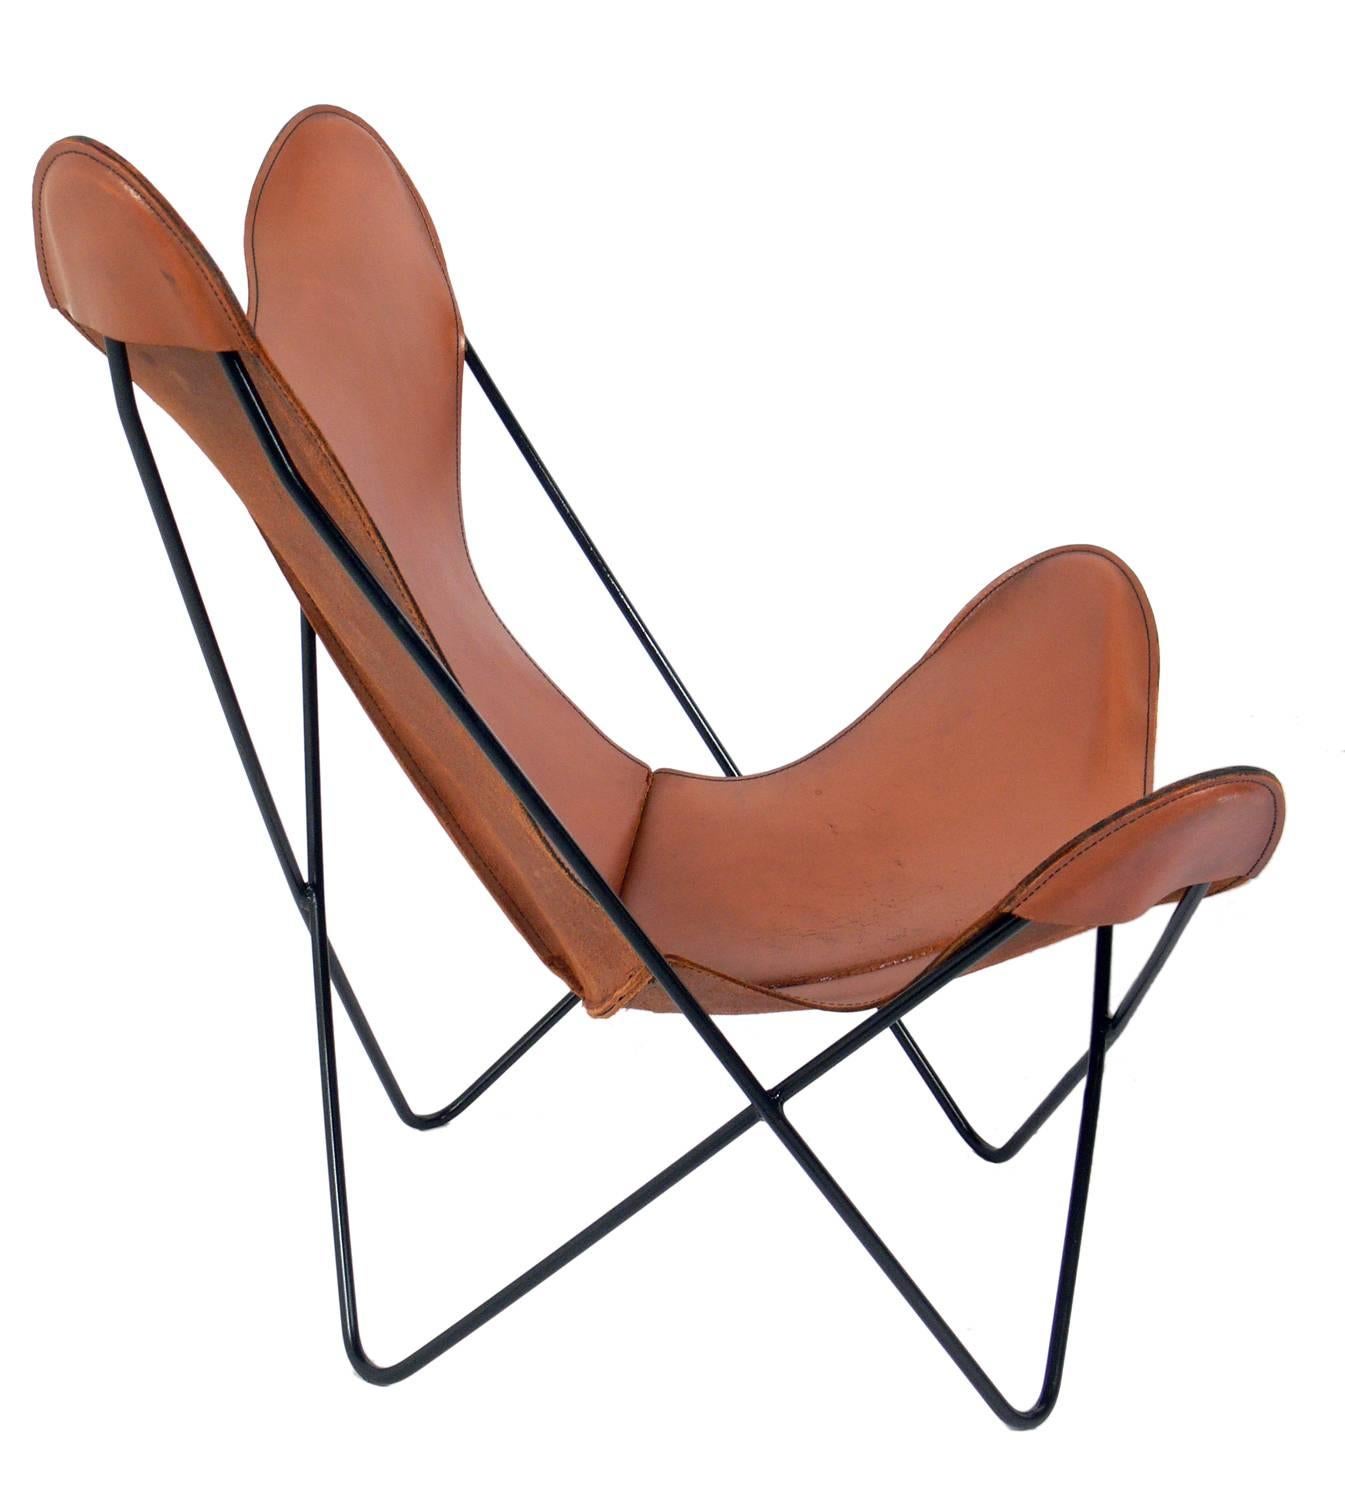 Mid-Century Modern Sculptural Leather Butterfly Chairs Designed by Jorge Ferrari-Hardoy